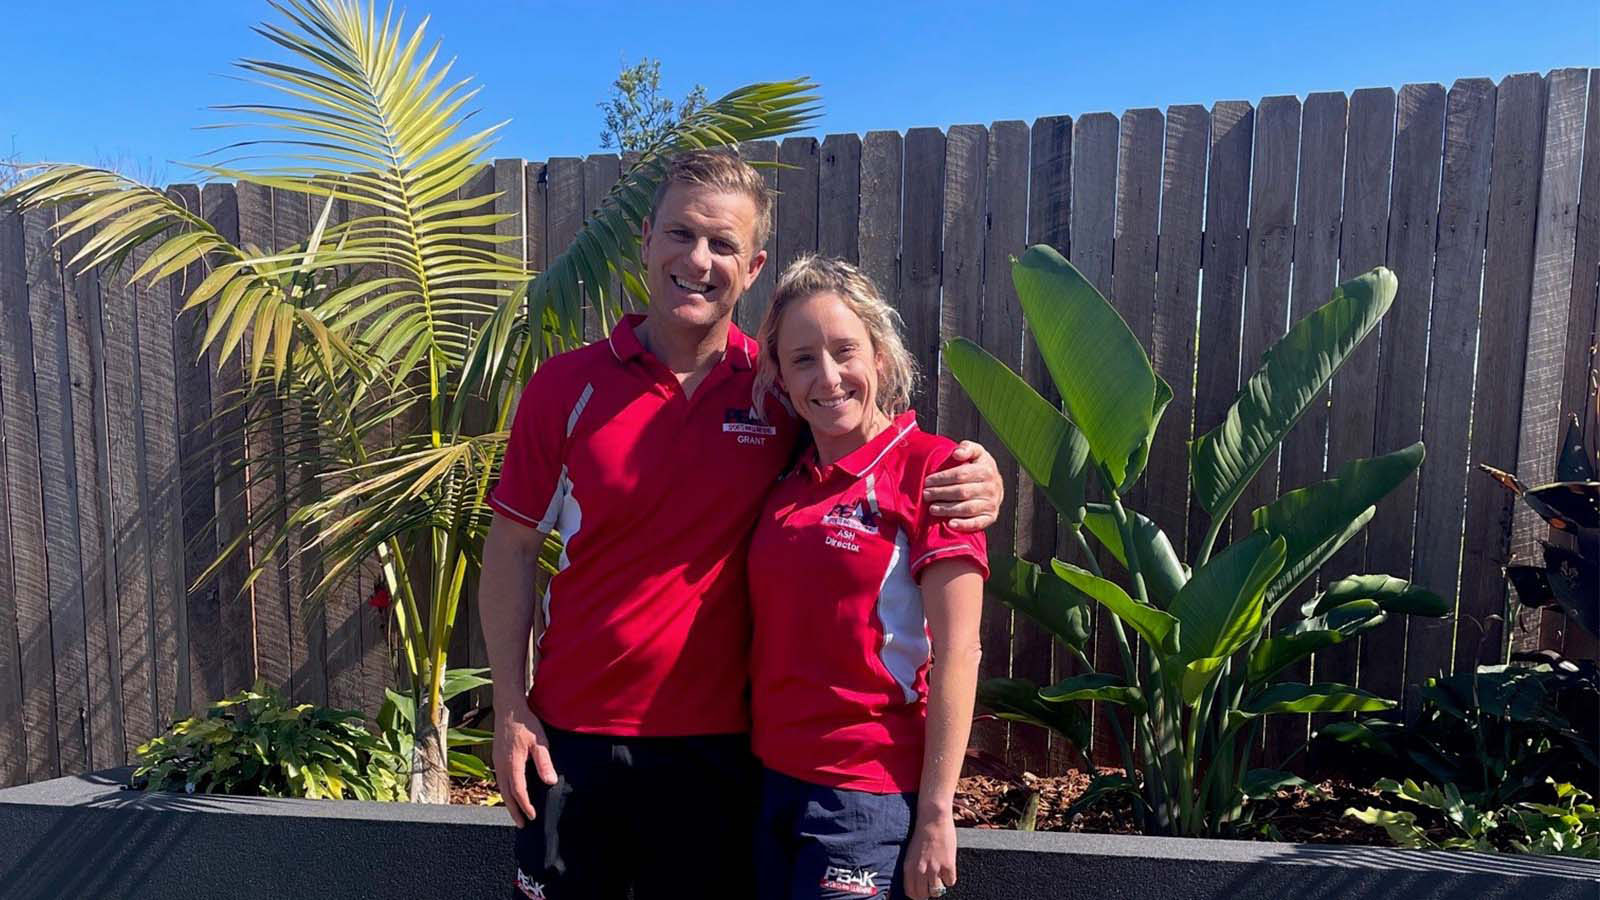 Grant and Ashleigh Neill are standing in a backyard wearing red polo shirts.